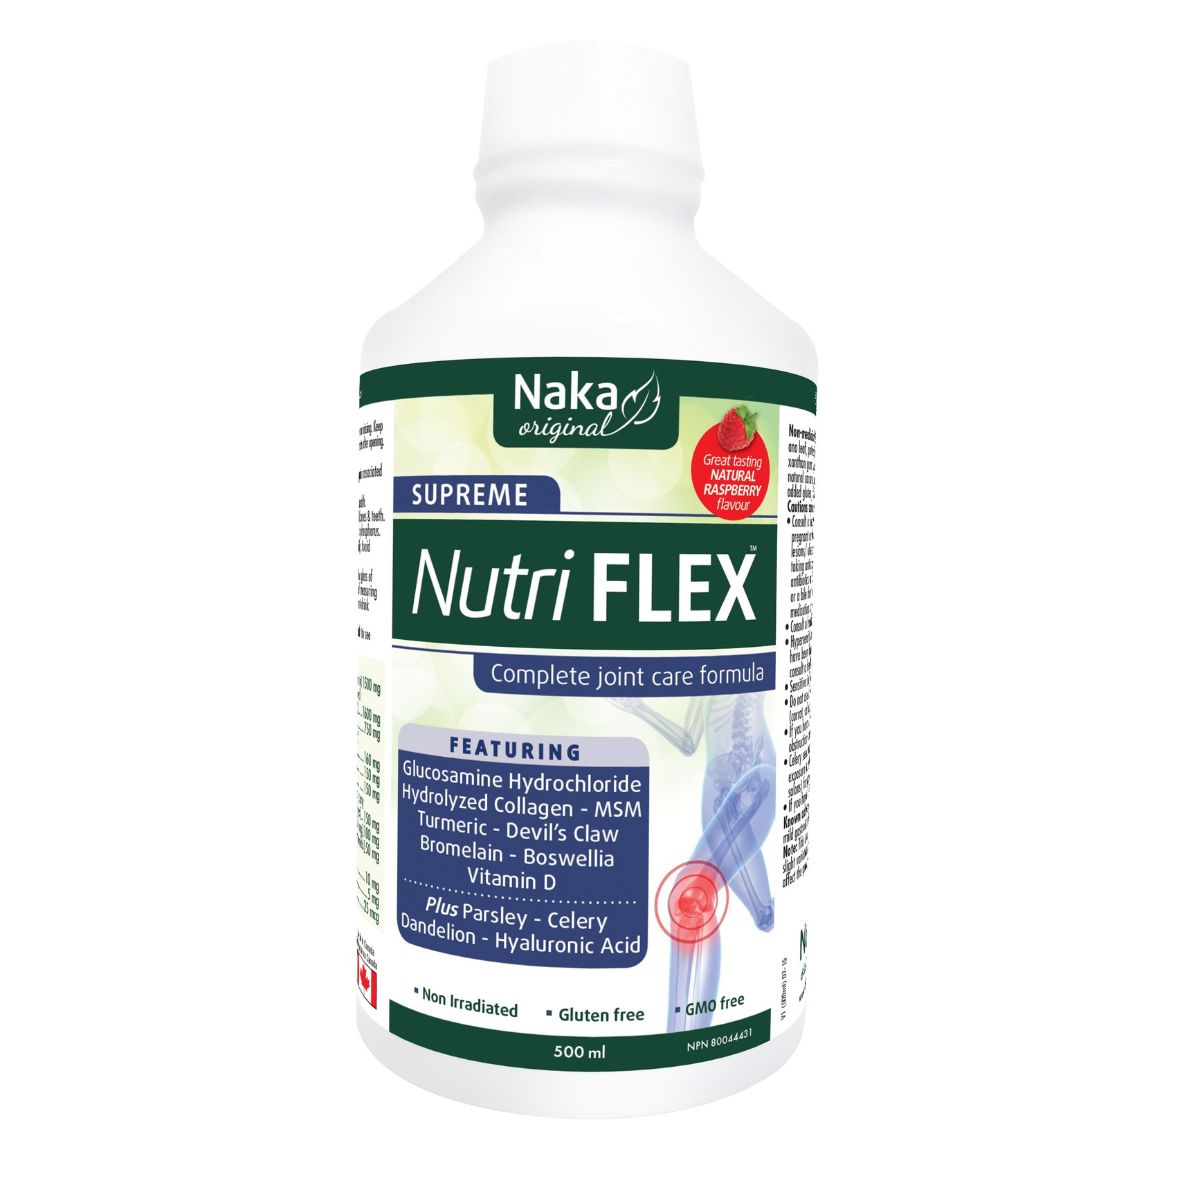 Naka NutriFlex Supreme 900ml product image - Joint and arthritis relief supplement in a green and white plastic bottle.